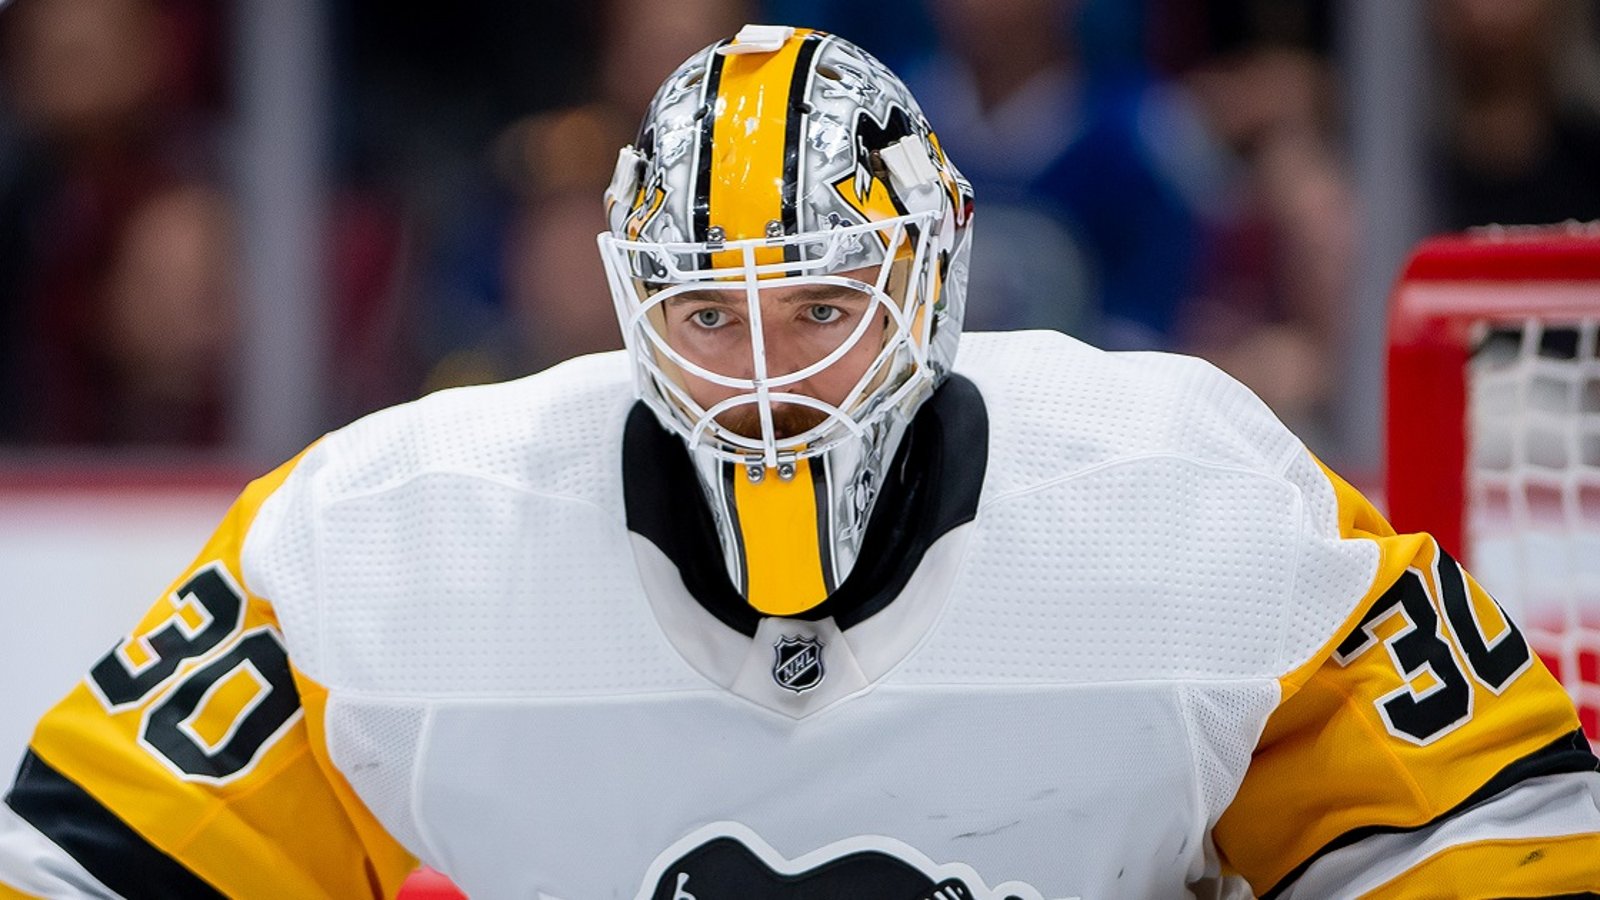 Rumor: Rumblings of a big goalie trade from the Penguins at the upcoming draft.